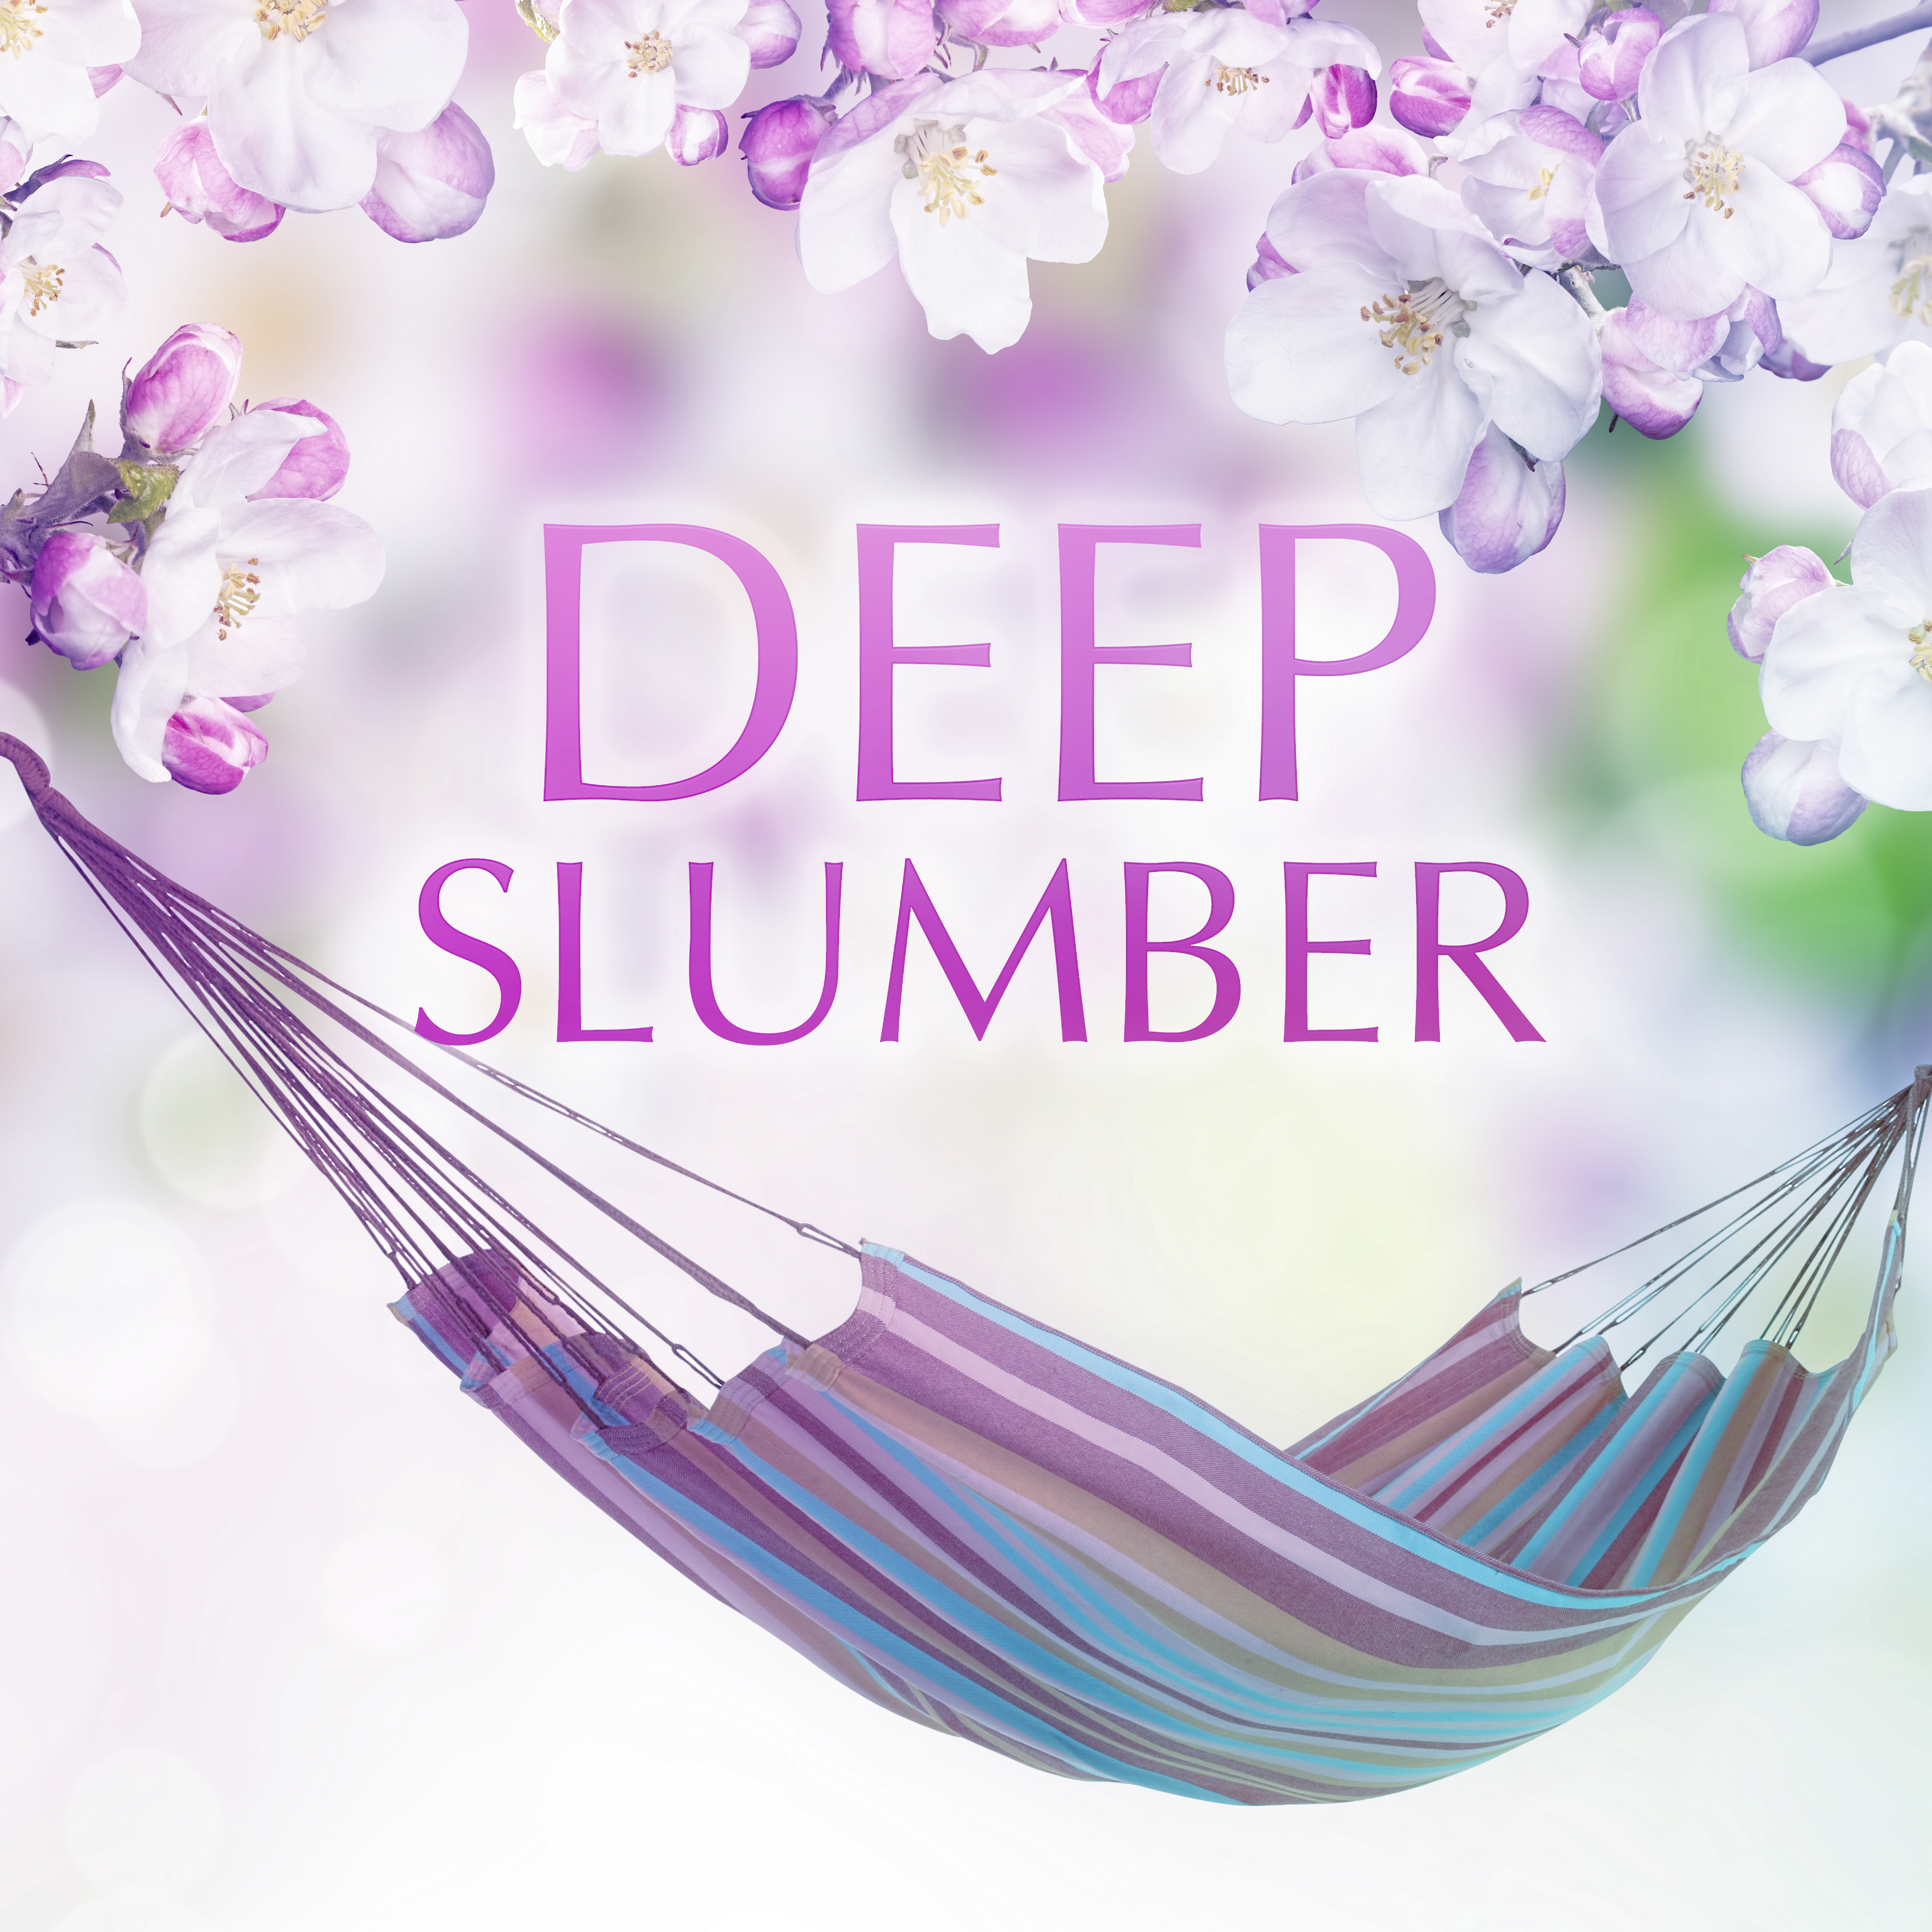 Deep Slumber – Fast Sleep, Dream, Nap Nature Sounds, Calmness, Lullaby, Relaxation, Sleep Therapy